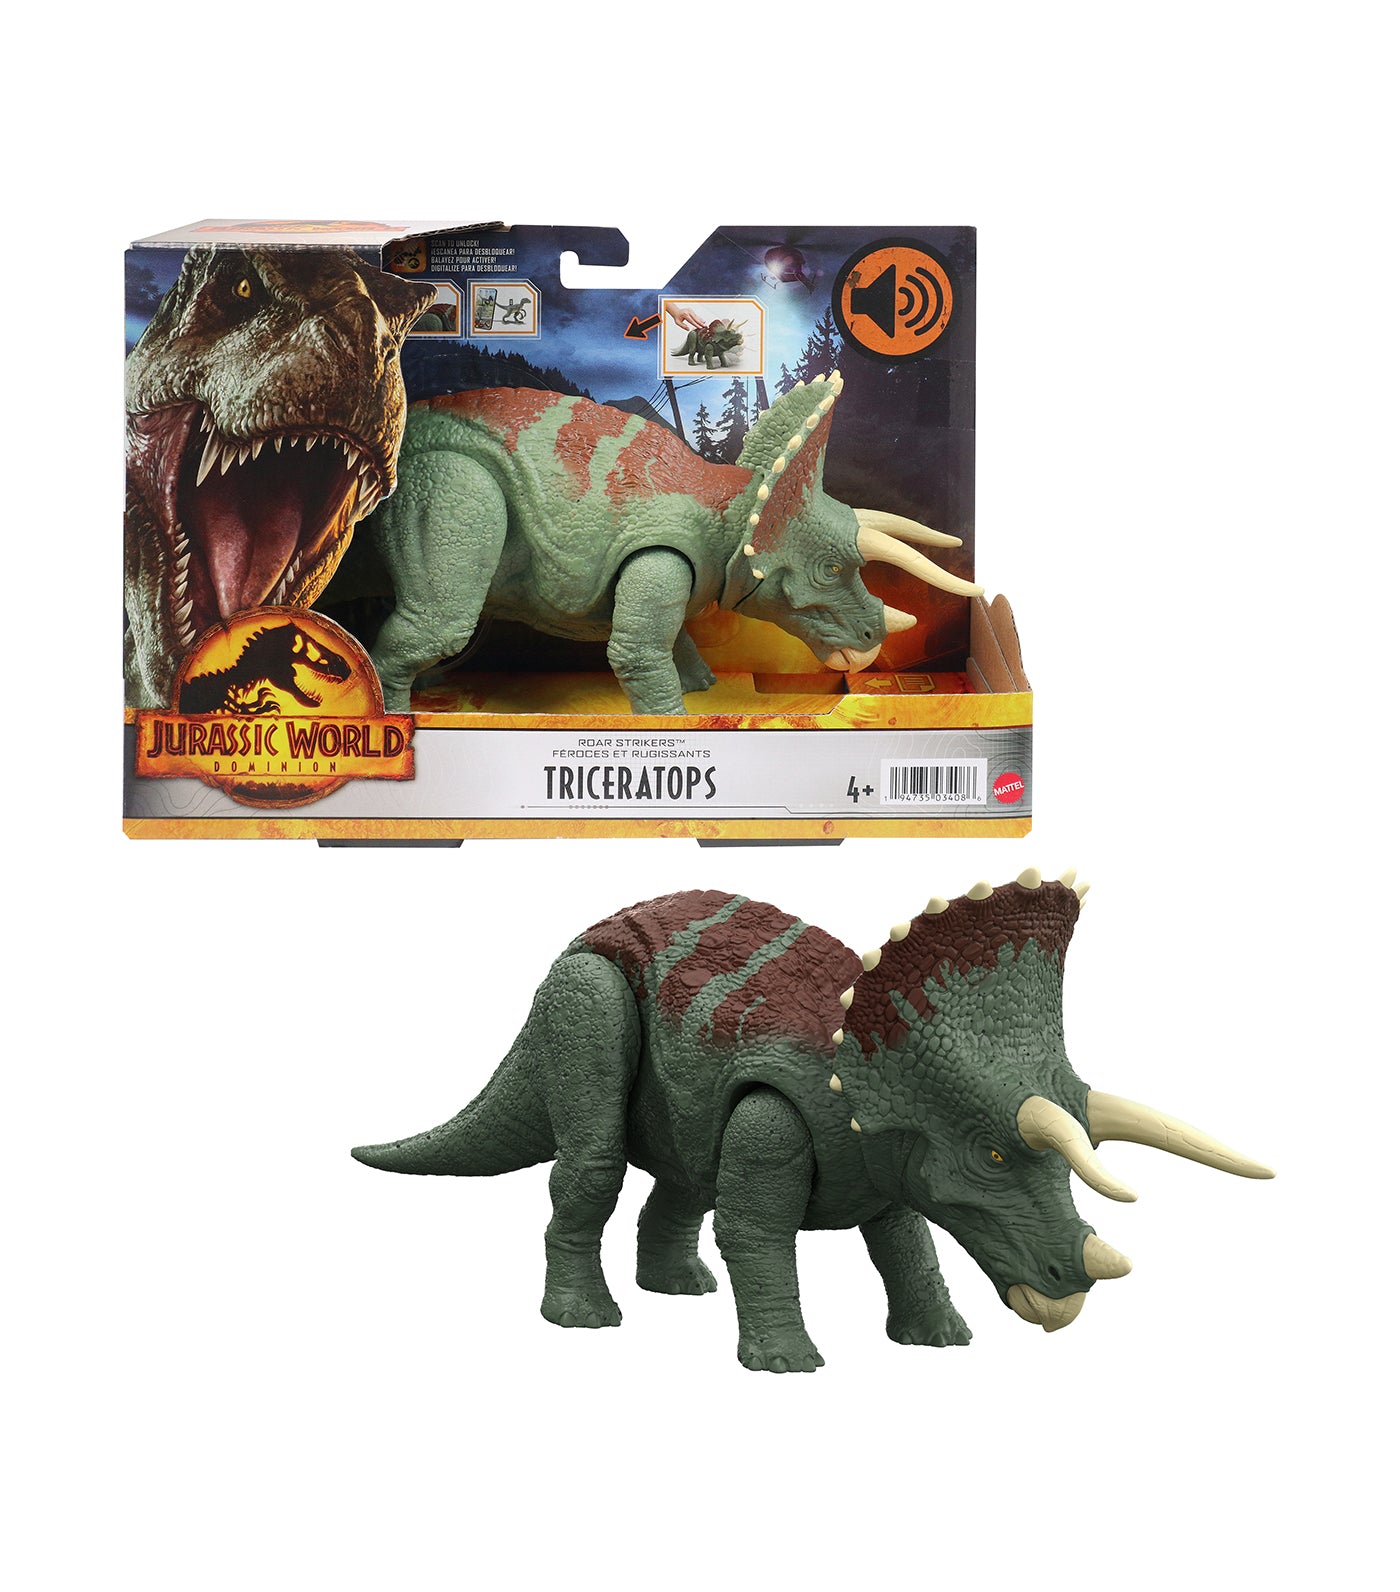 LEGO® Jurassic World Triceratops Research